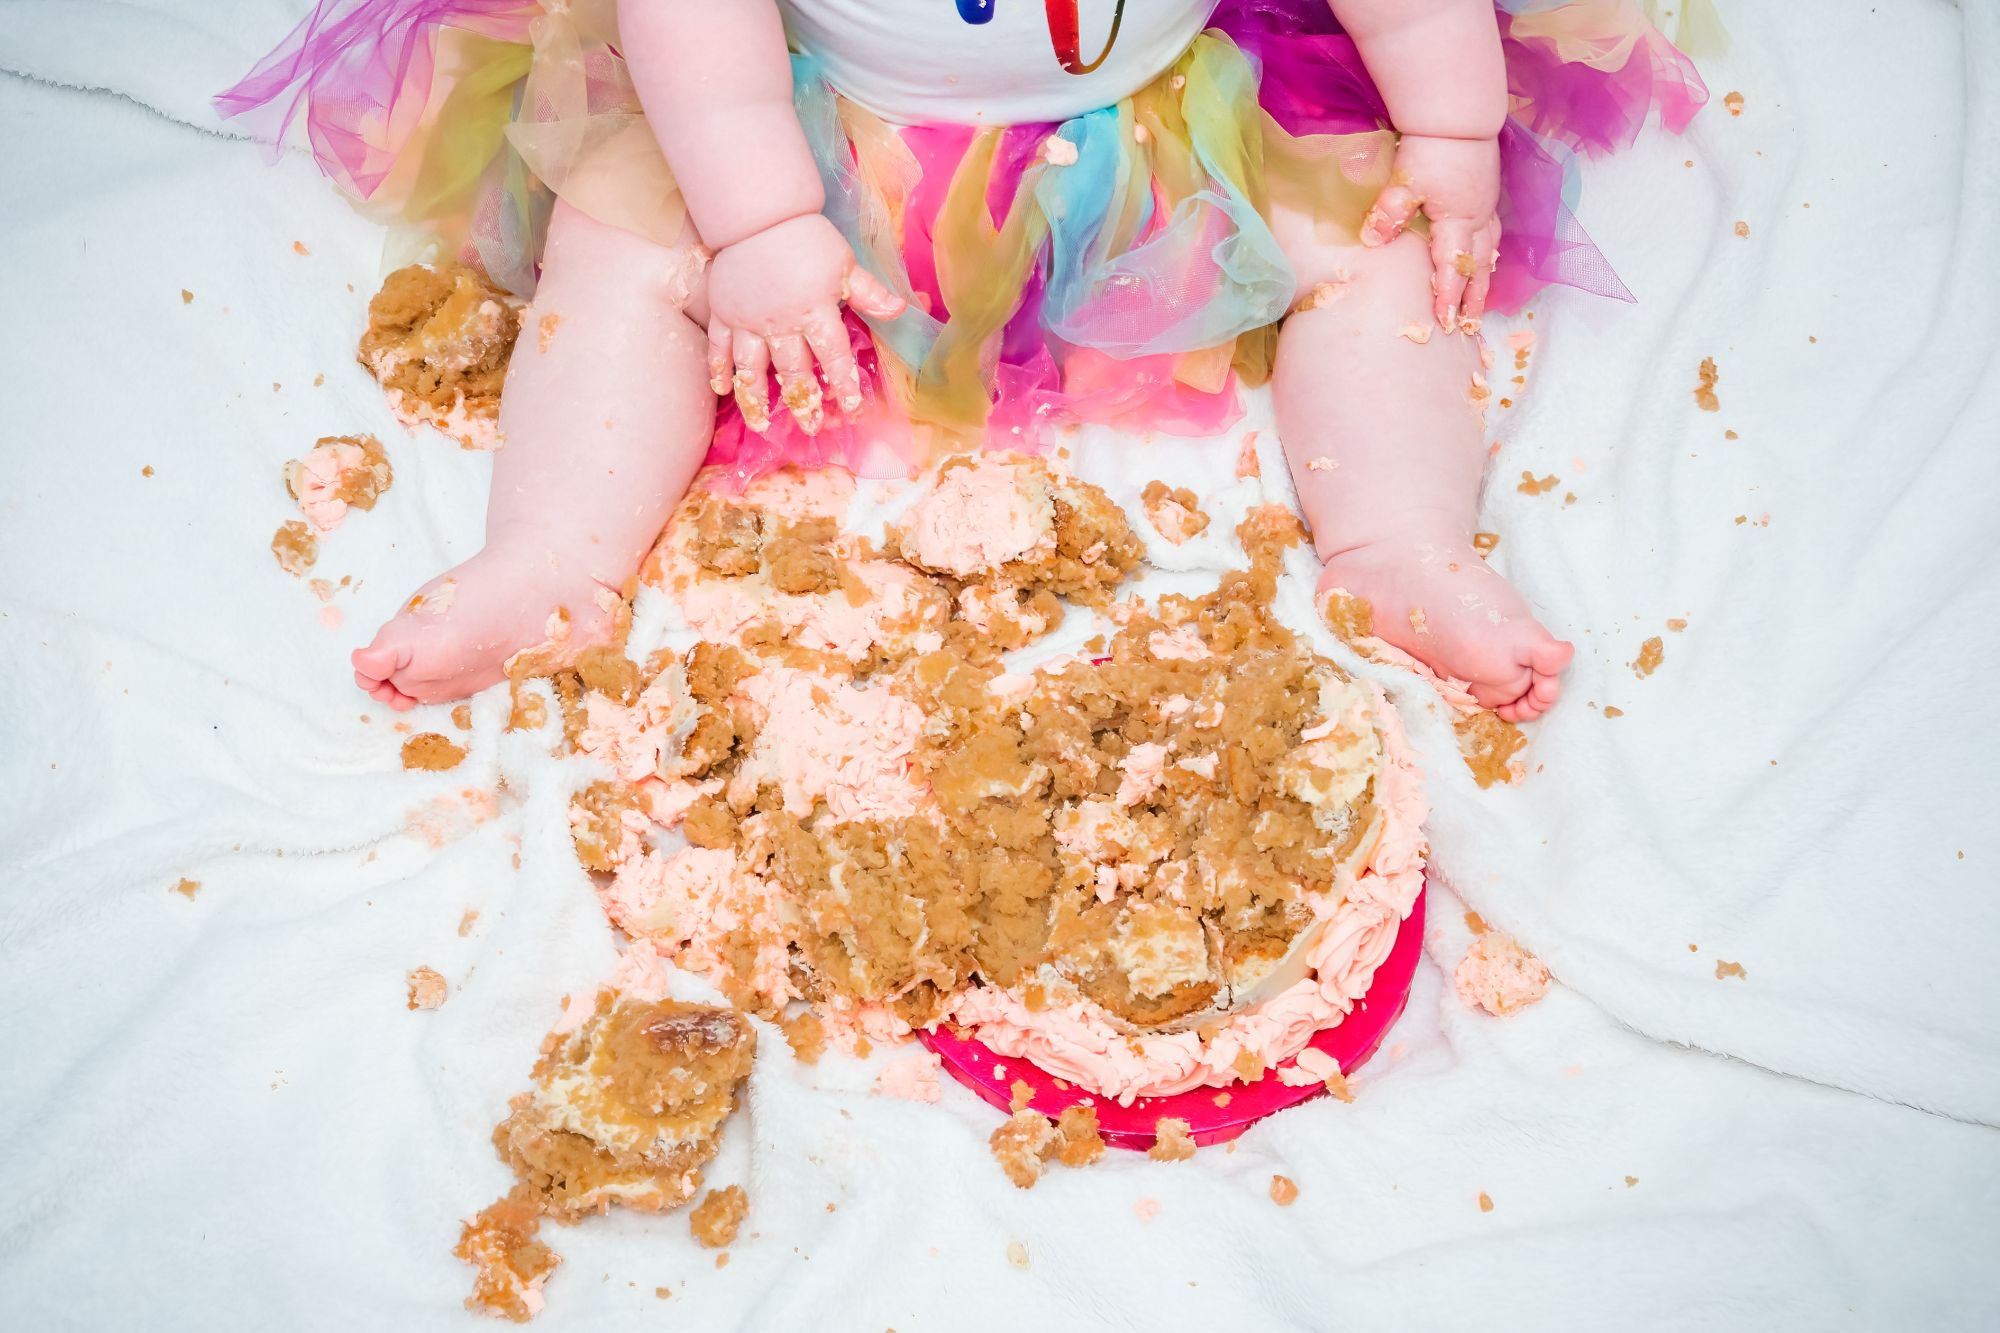 A cake is broken into tiny pieces and photographed from above. You can see two little legs and two little hands that are covered in icing after the little girl has enjoyed her cake smash session